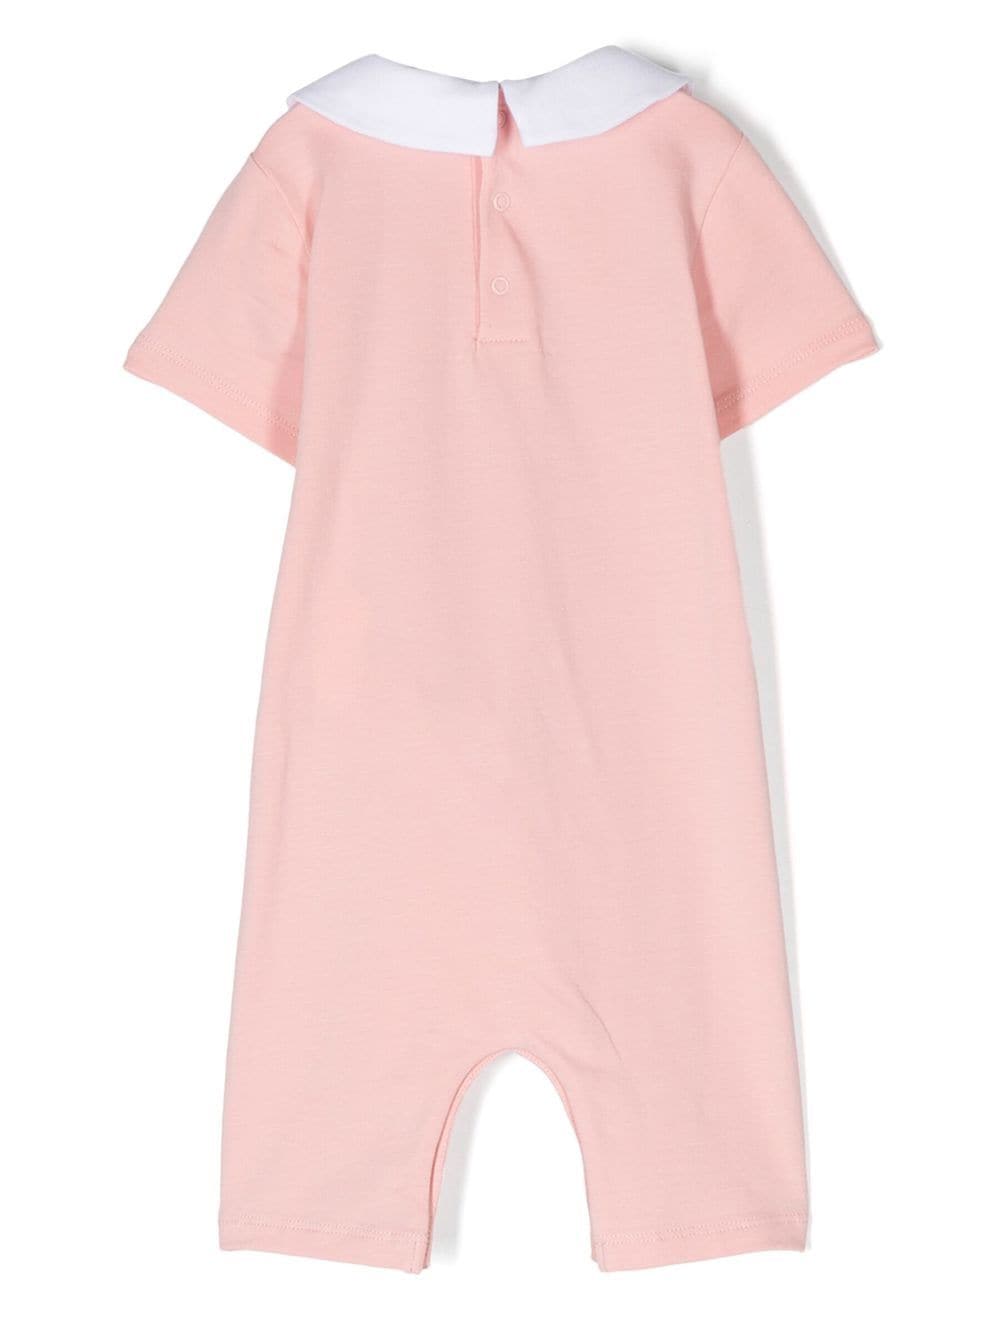 Pink romper for baby girls with print